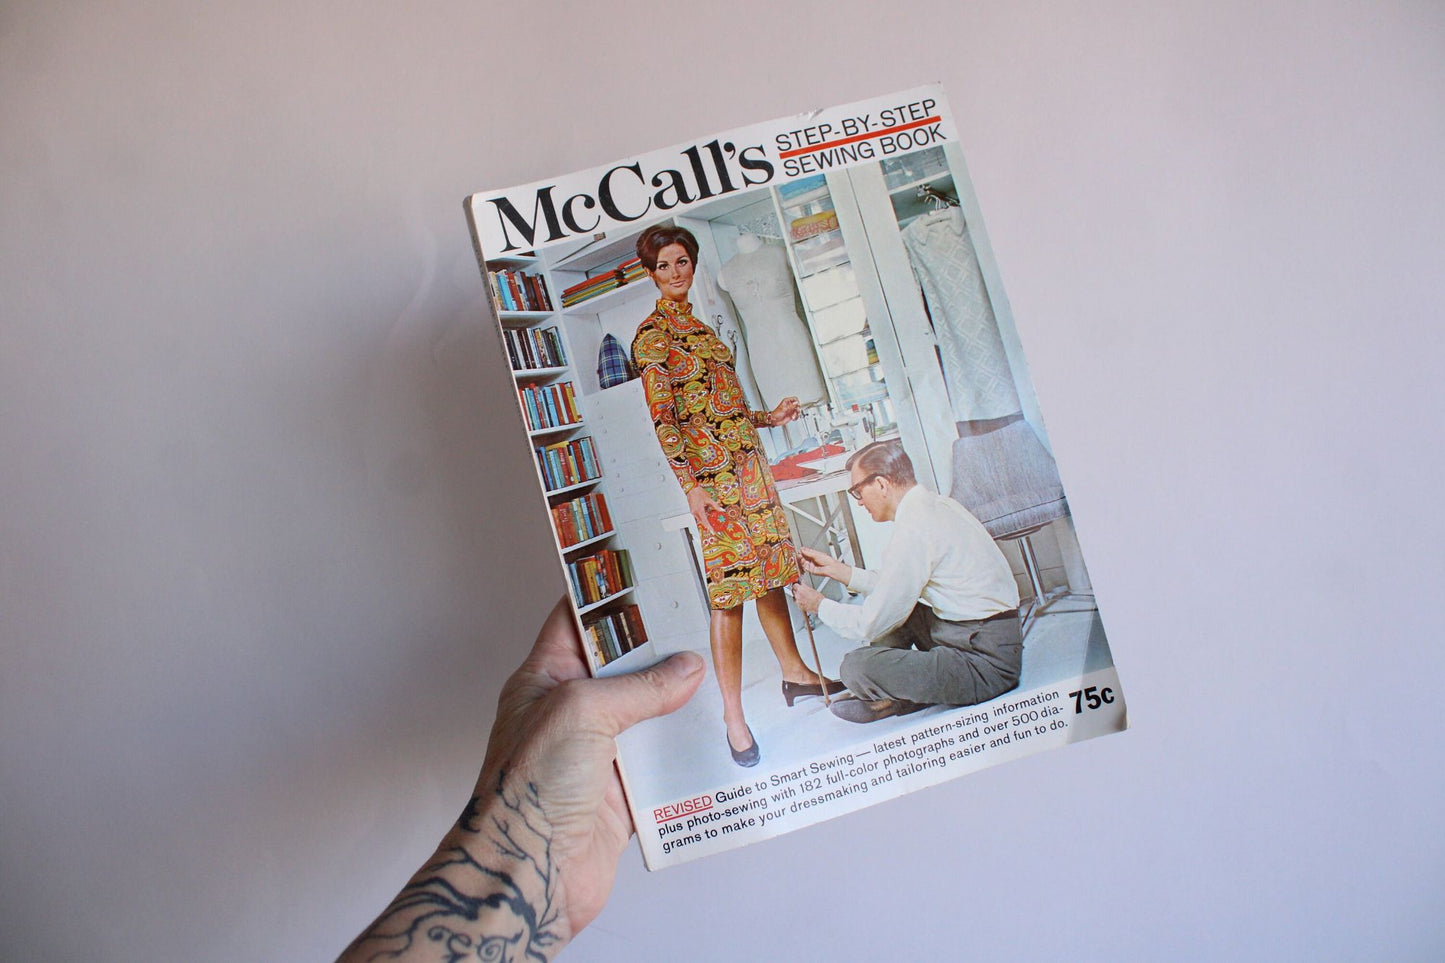 Vintage 1960s Magazine, McCalls Sewing Book, Patterns, Photos, Instructions